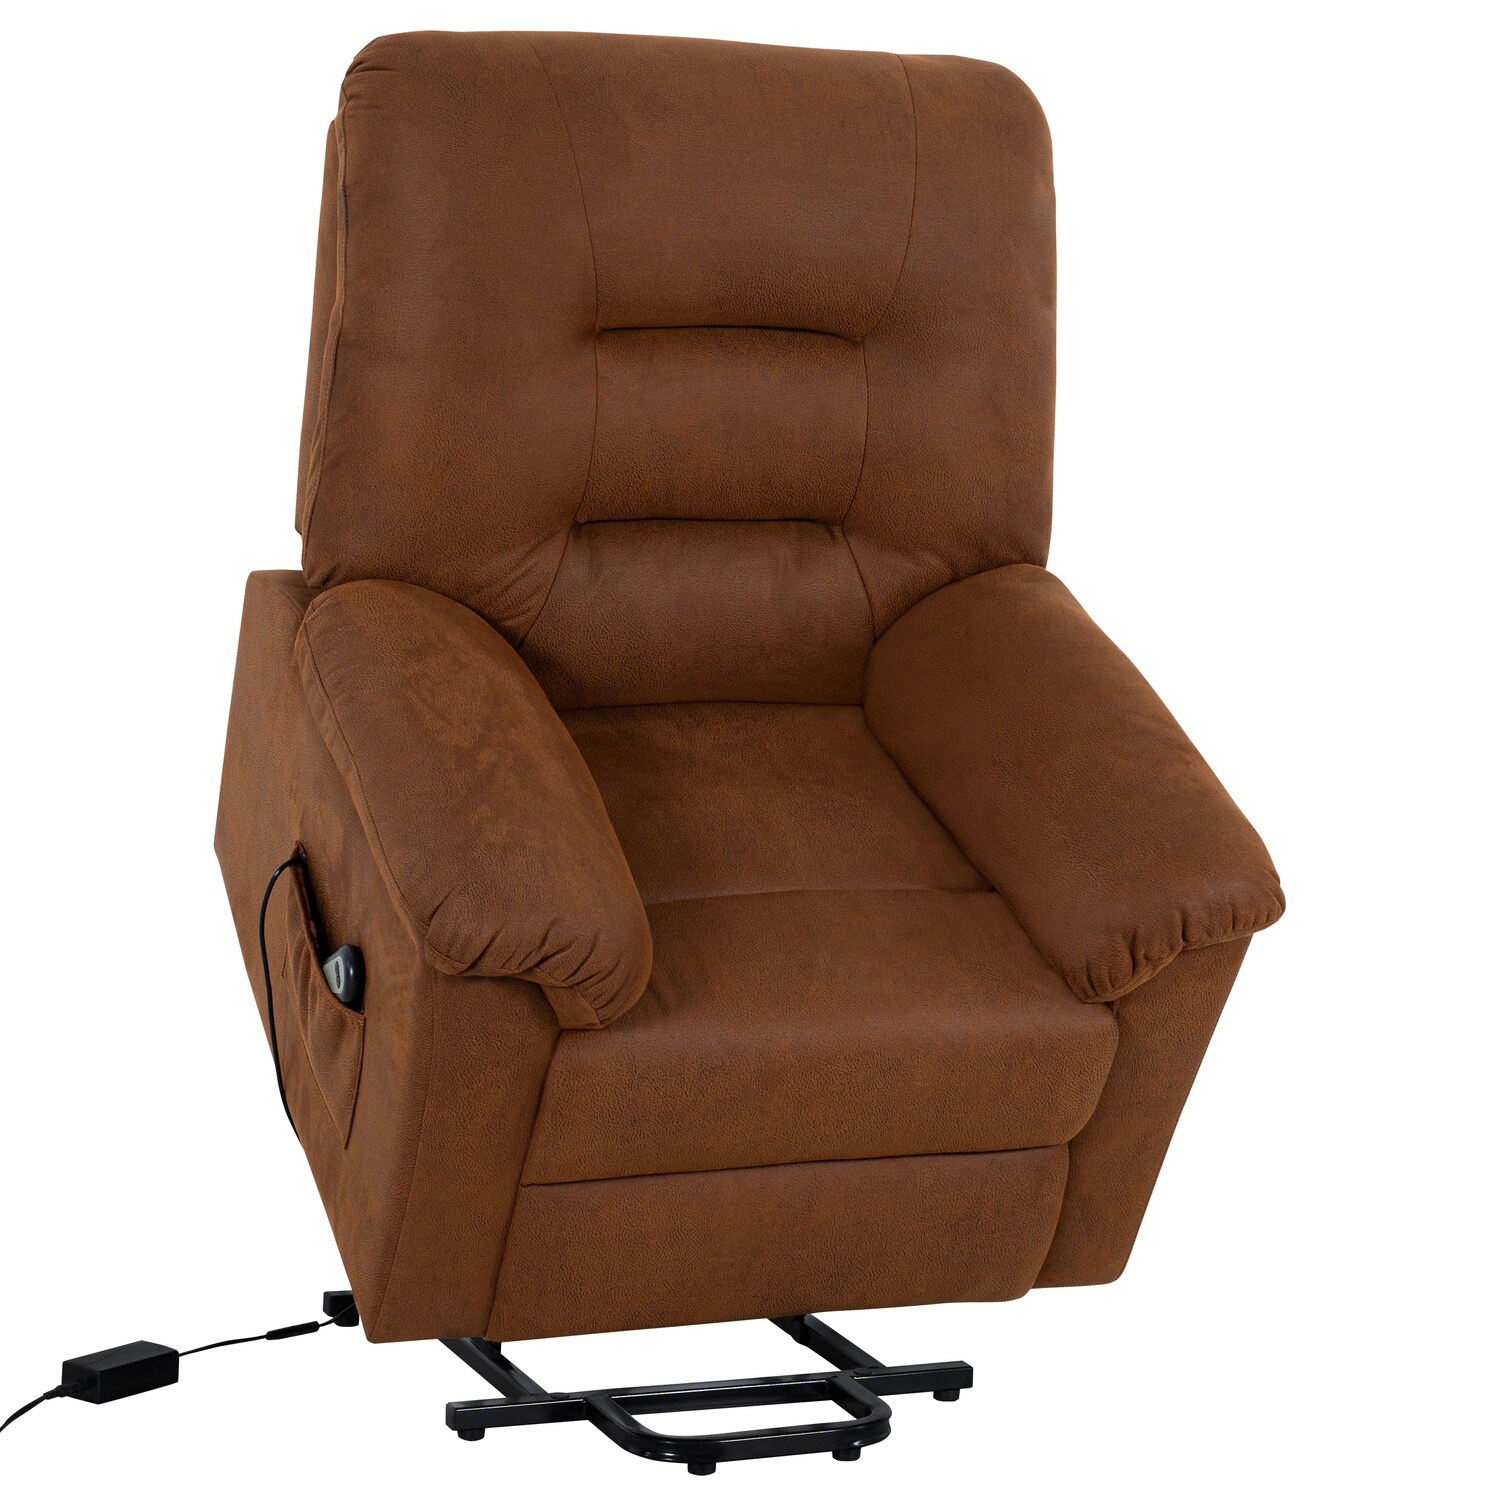 Fayette Power Recliner Chair, Lift Recliner, Electric Recliner Chairs, Lift Chairs Recliners for Elderly with Footrest by Naomi Home Color Mocha